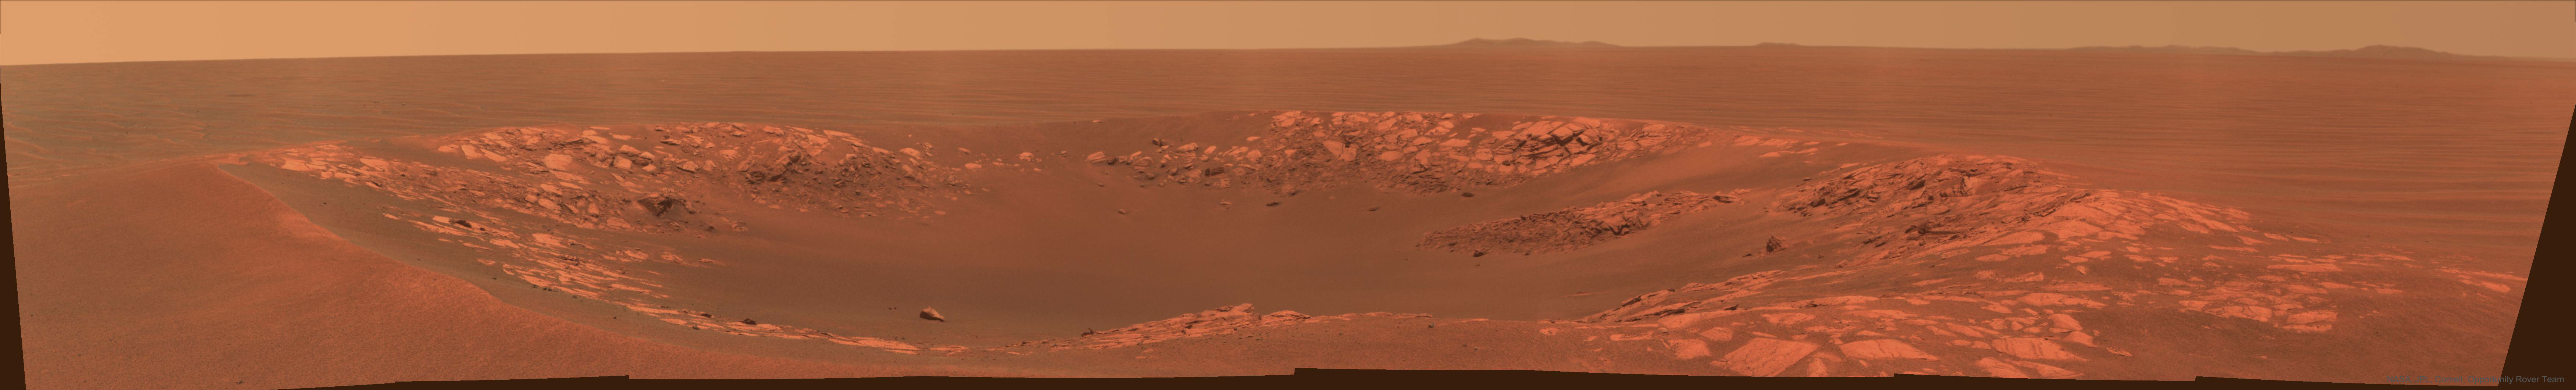 Intrepid Crater on Mars from Opportunity